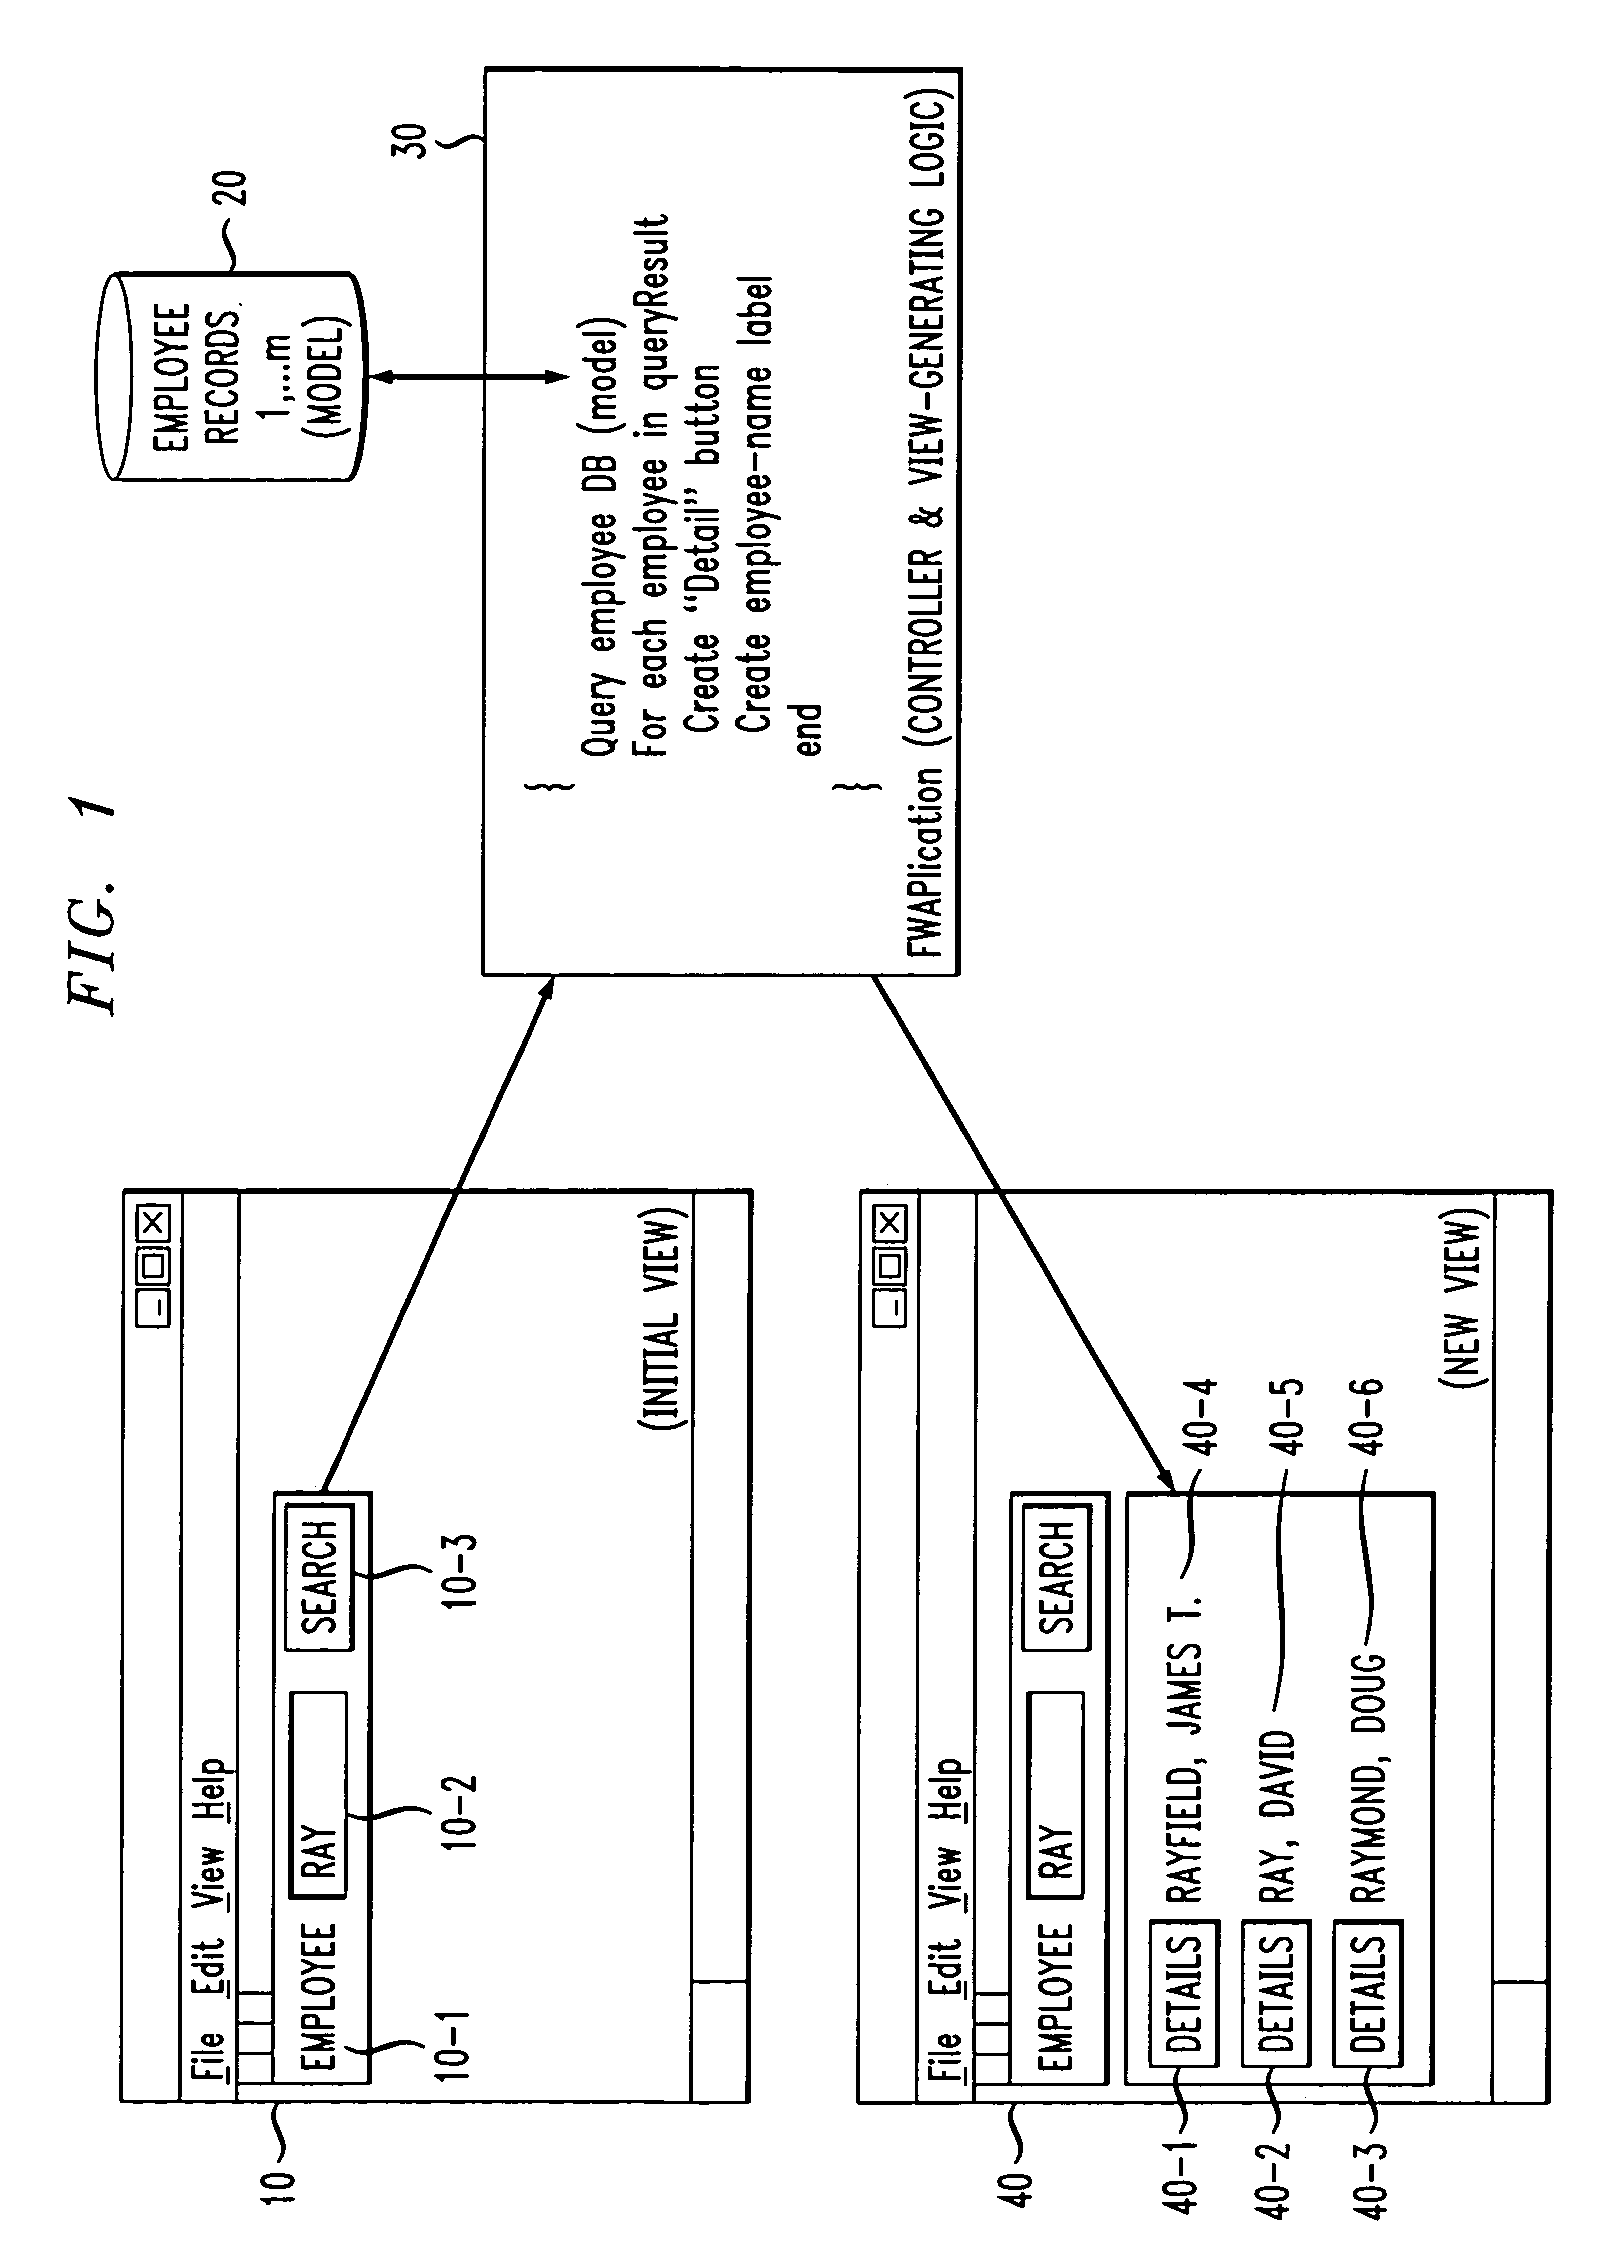 System and method for dynamic runtime partitioning of model-view-controller applications